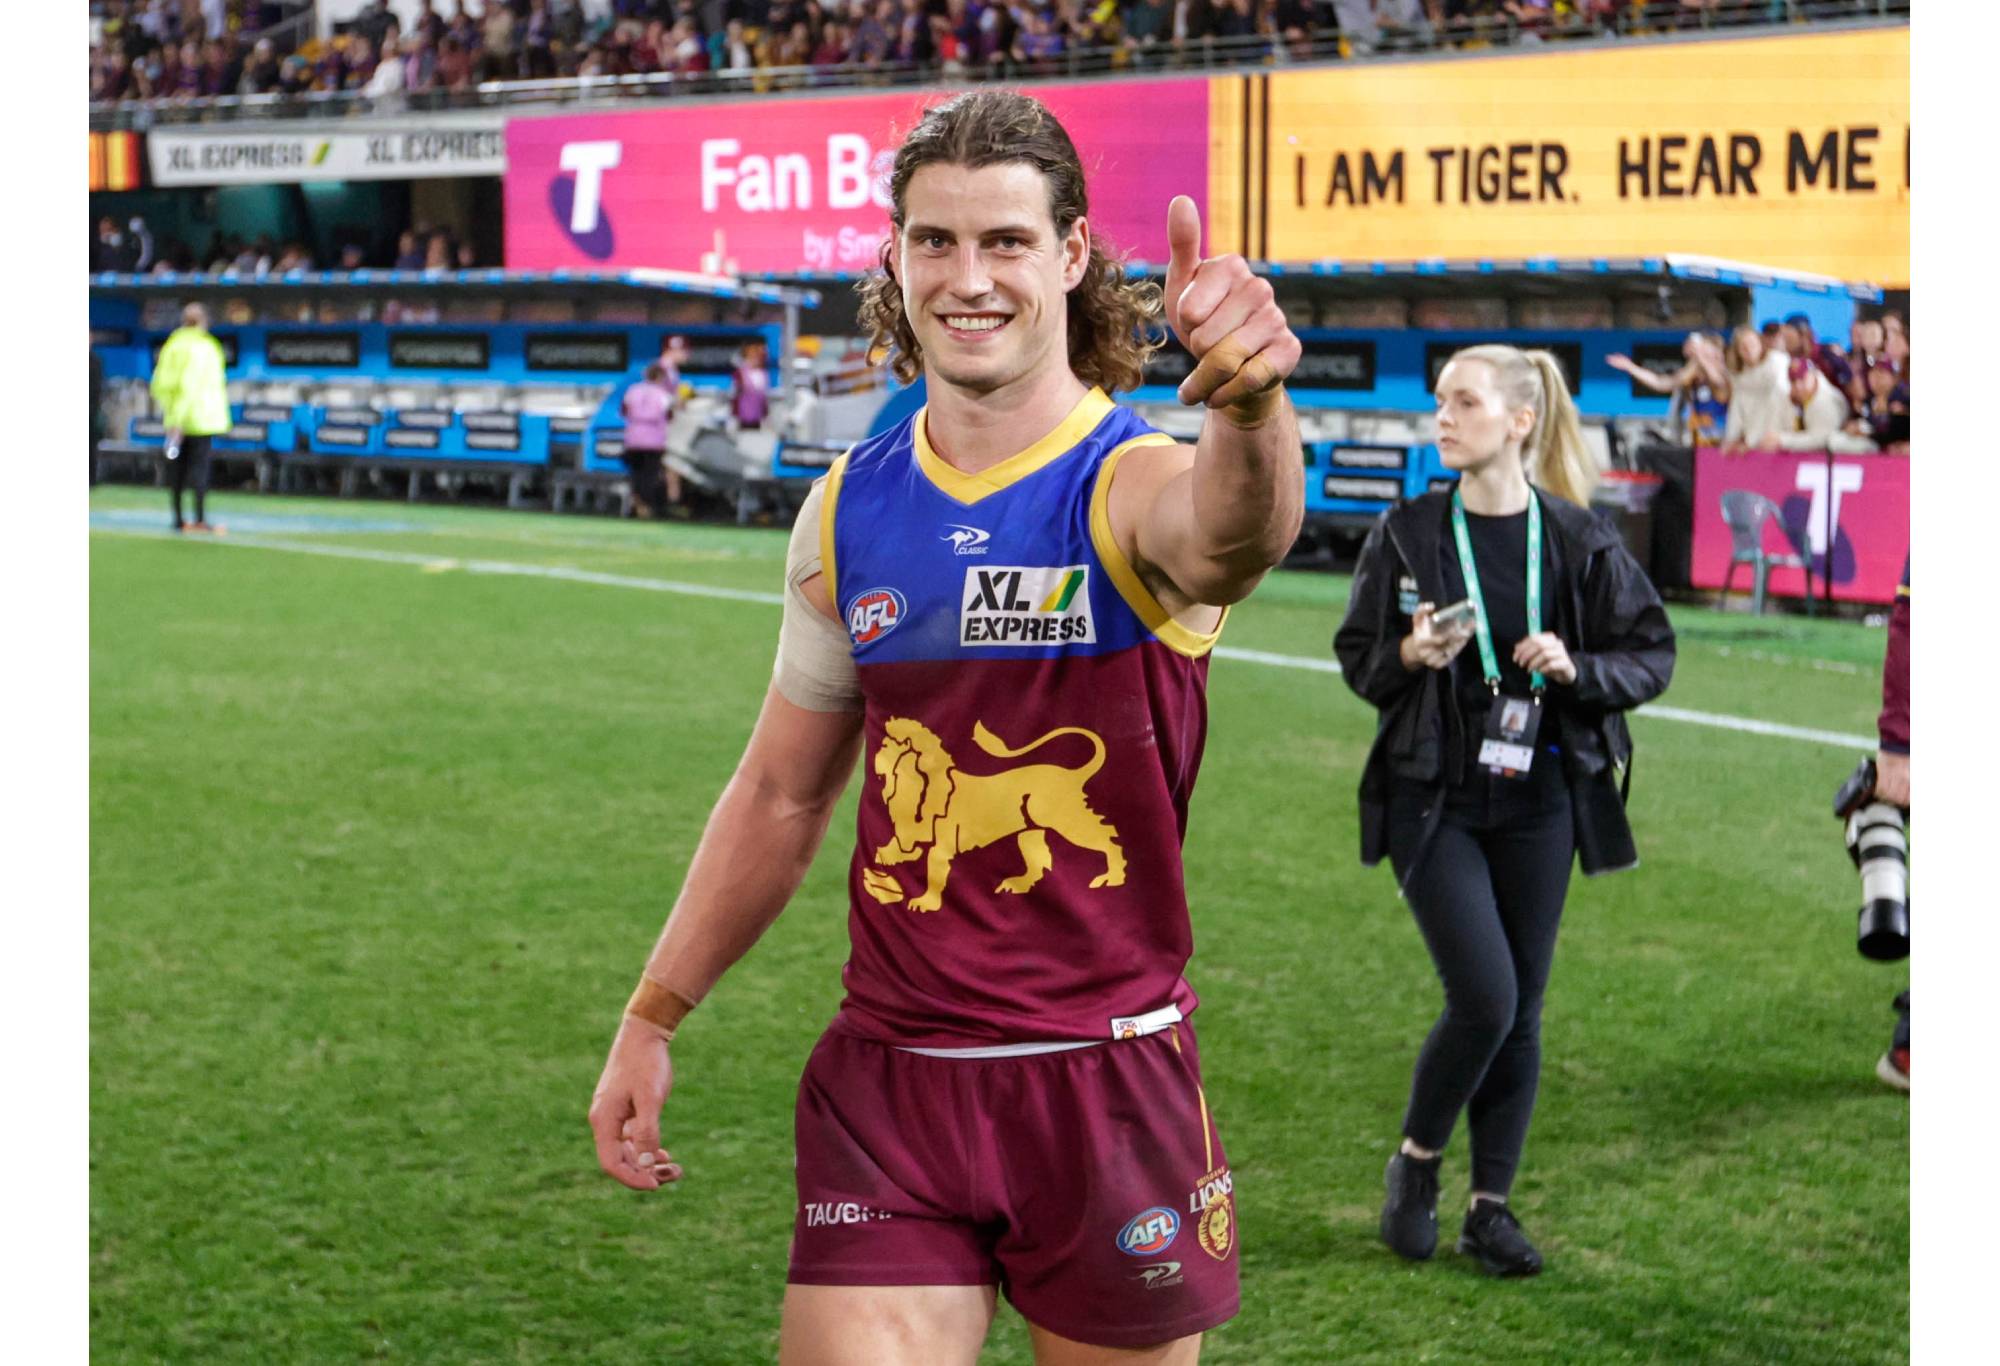 BRISBANE, AUSTRALIA - SEPTEMBER 01: Jarrod Berry of the Lions celebrates after the 2022 AFL Second Elimination Final match between the Brisbane Lions and the Richmond Tigers at The Gabba on September 1, 2022 in Brisbane, Australia. (Photo by Russell Freeman/AFL Photos via Getty Images)